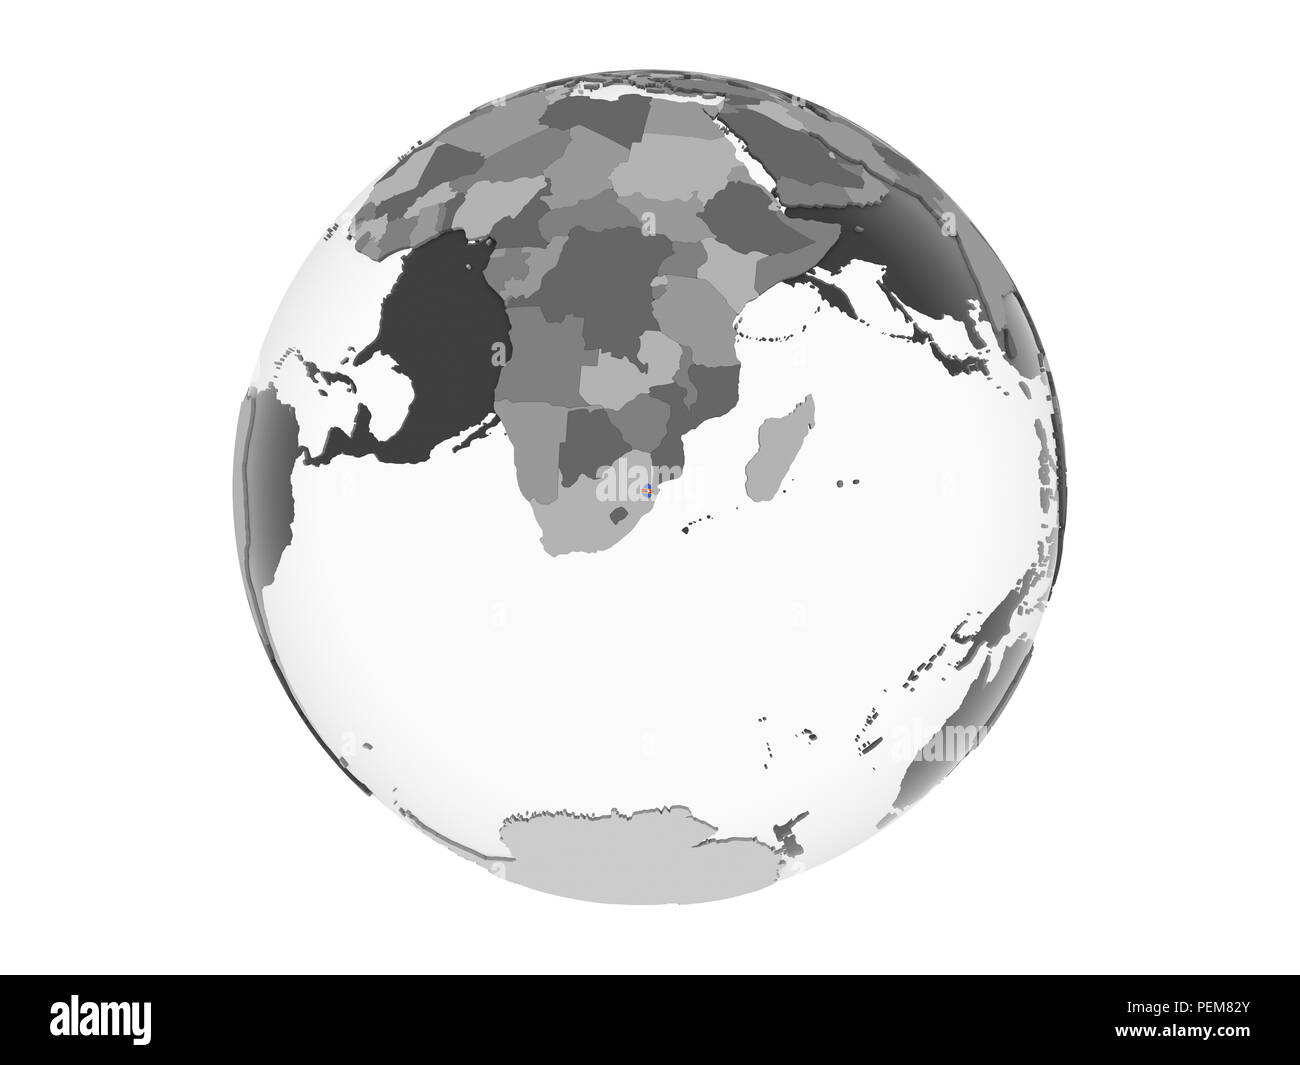 Swaziland on gray political globe with embedded flag. 3D illustration isolated on white background. Stock Photo